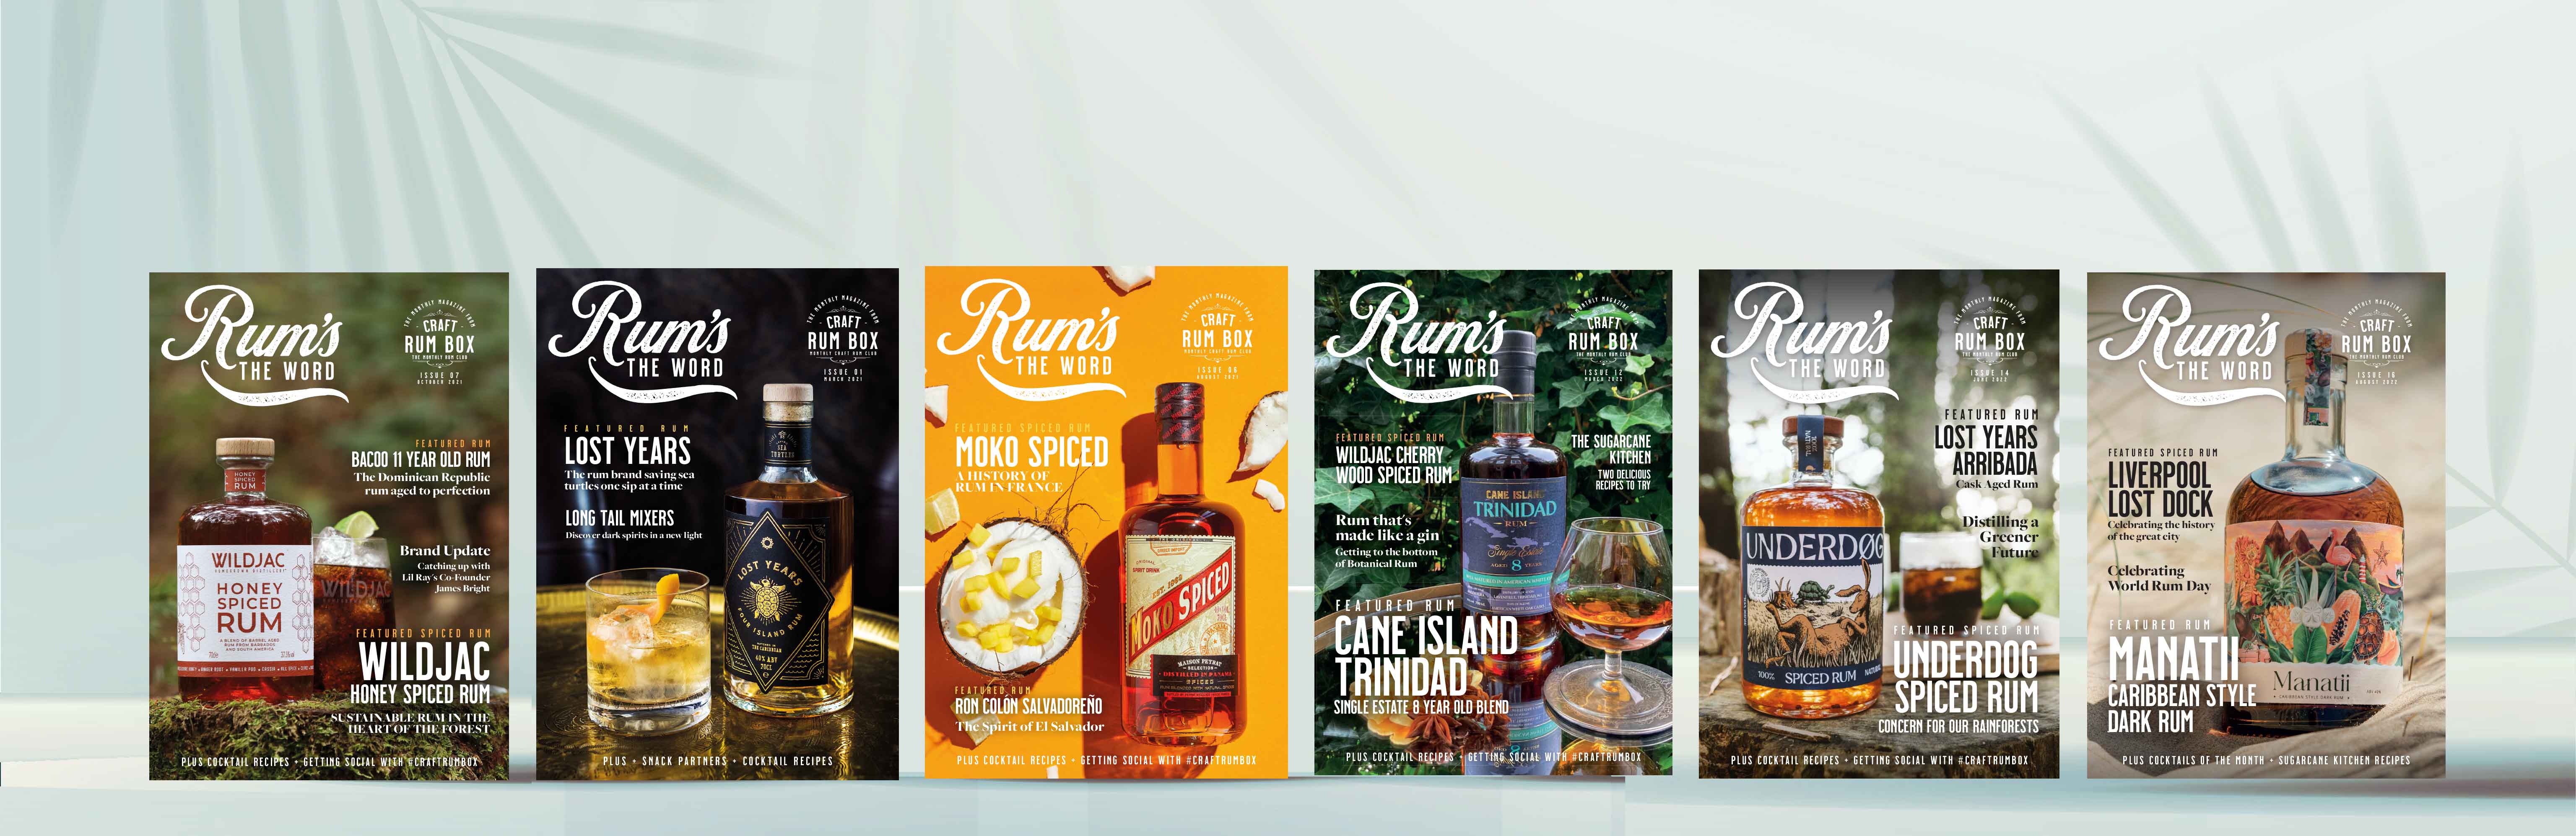 Rums the Word Craft Rum Box